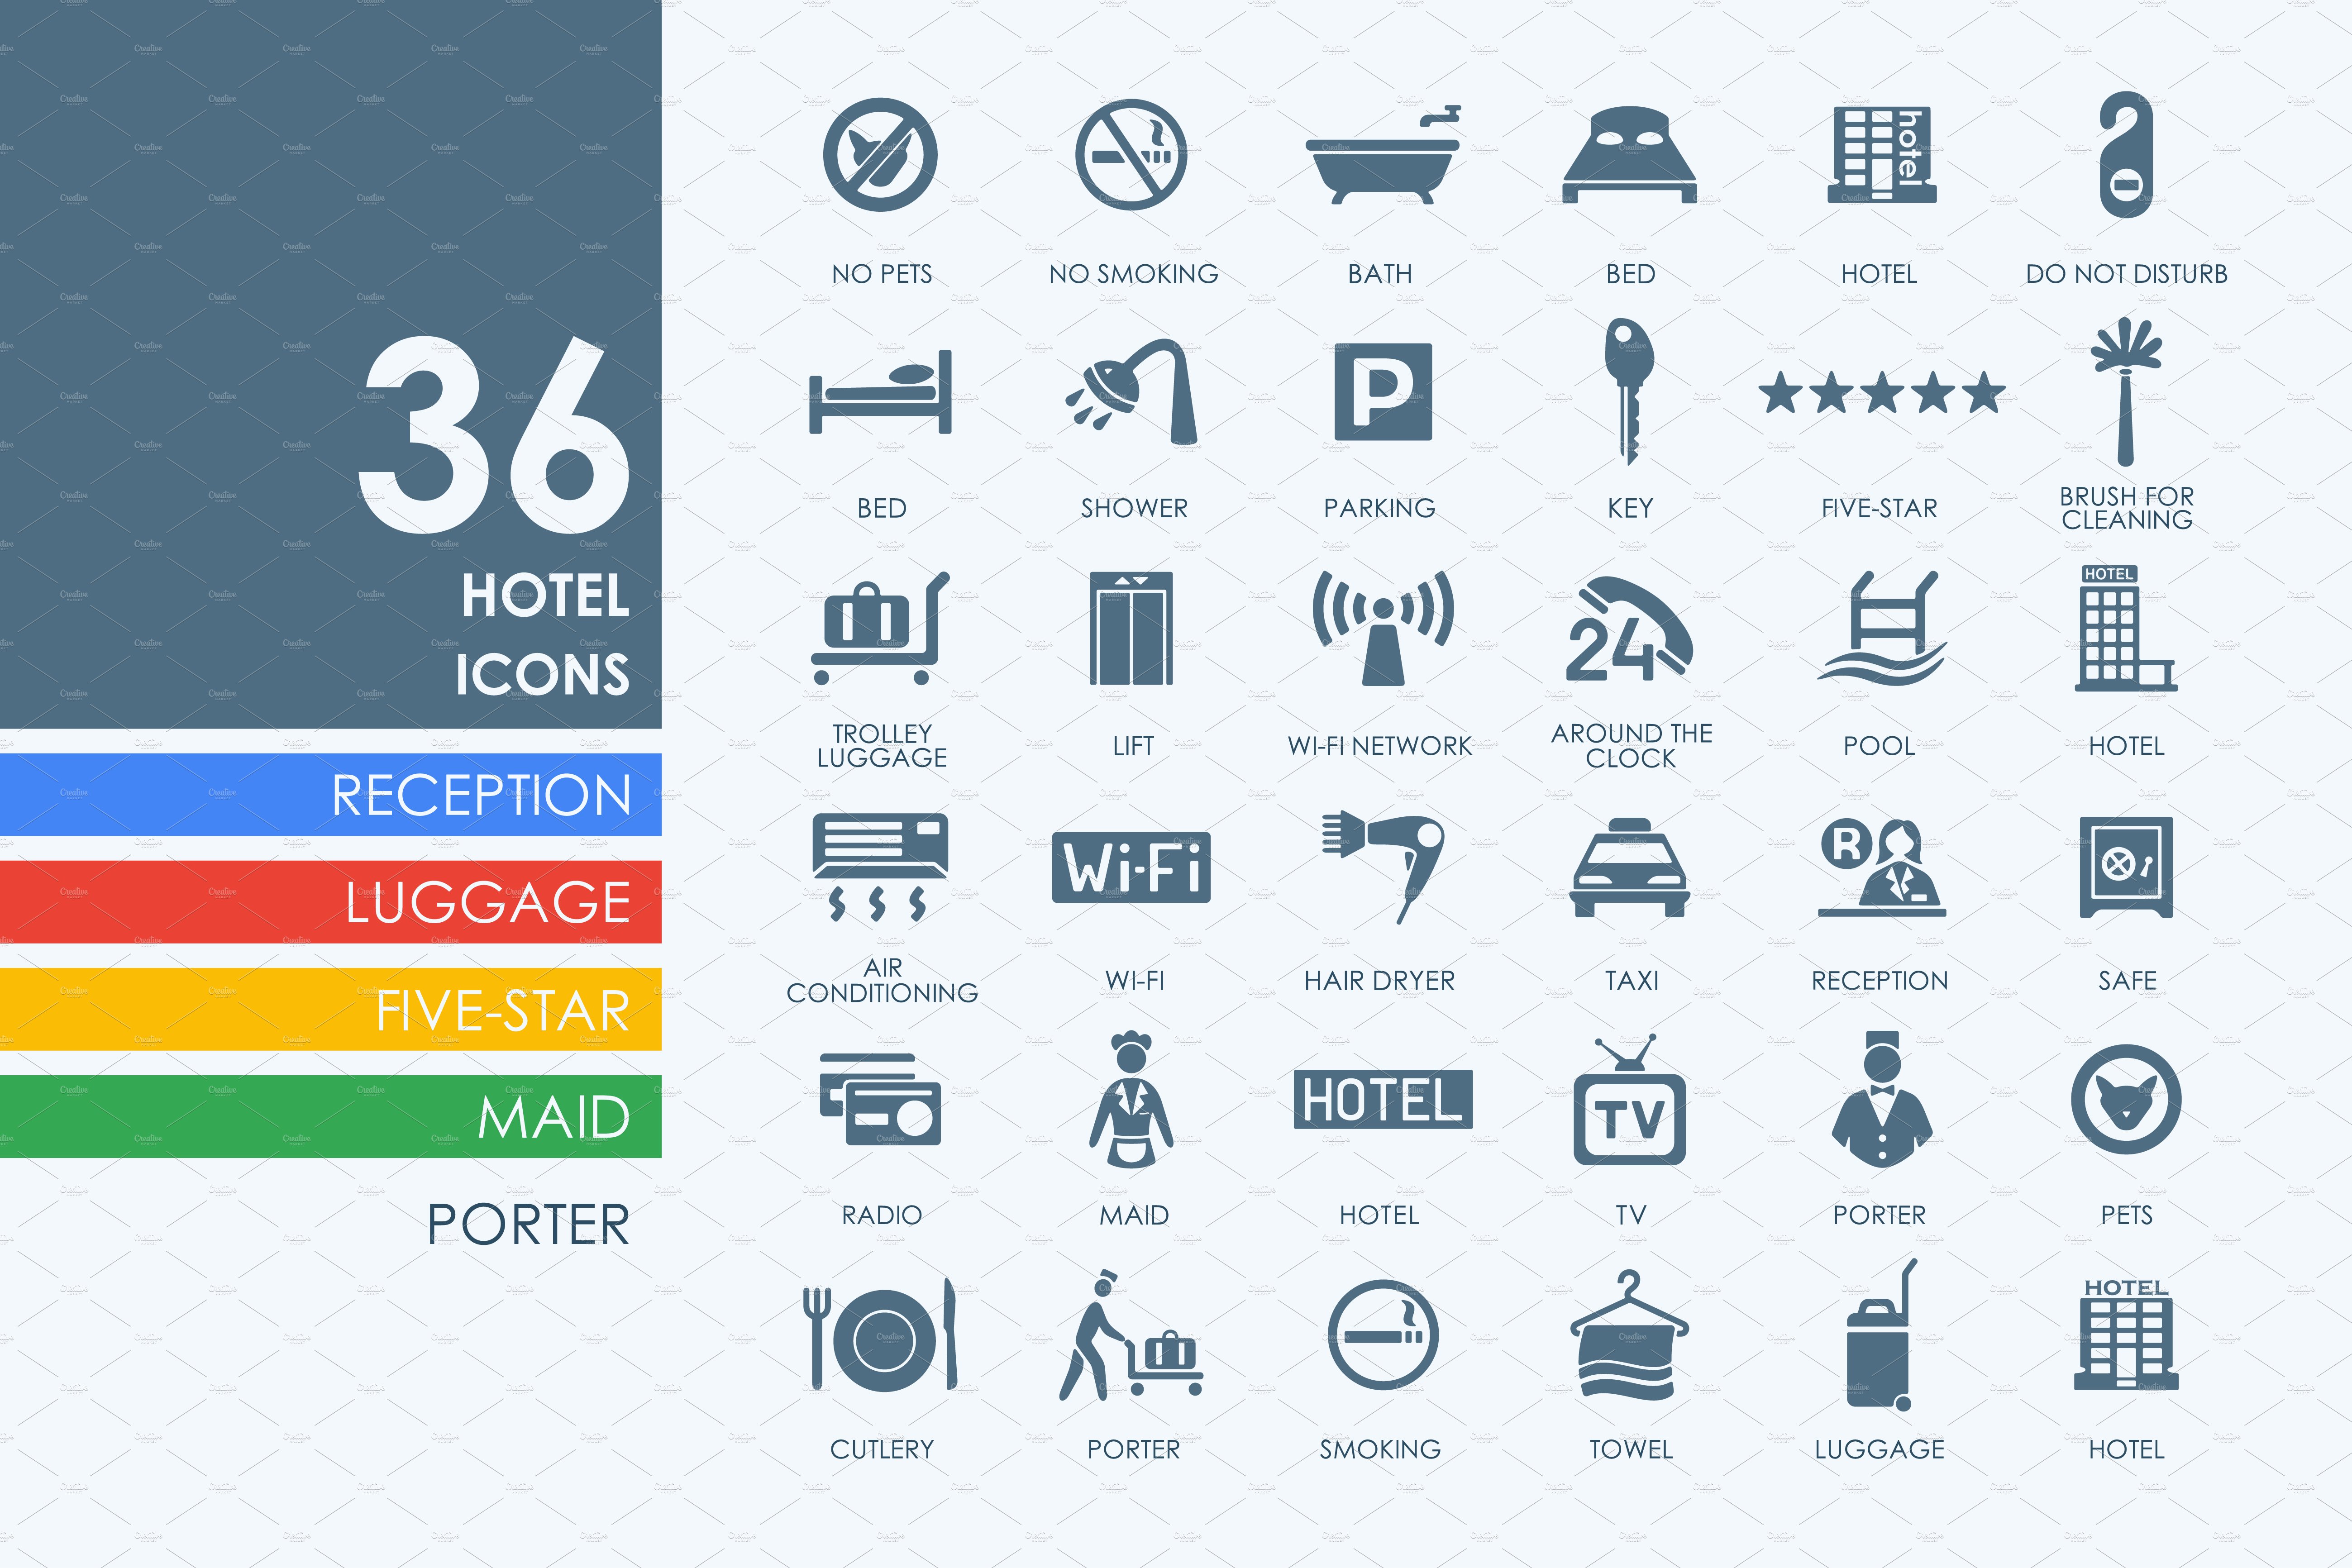 36 Hotel icons cover image.